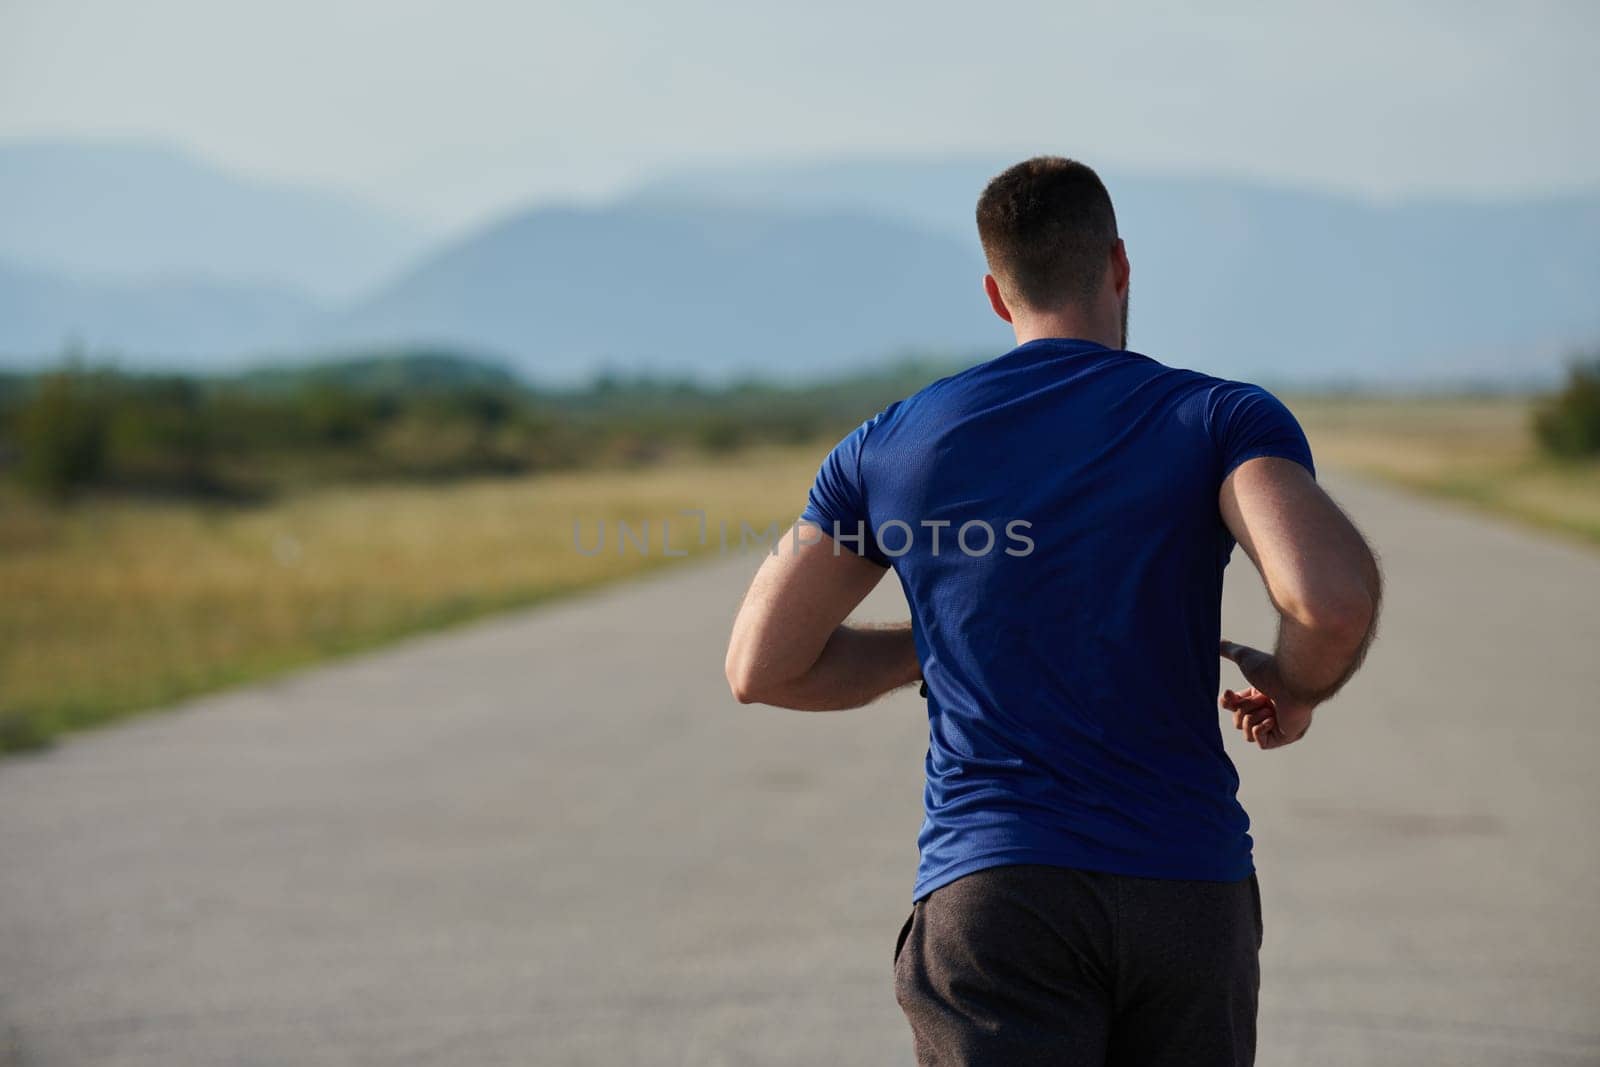 An athletic man exudes determination as he runs, embodying a commitment to a healthy lifestyle and preparation for an upcoming marathon competition